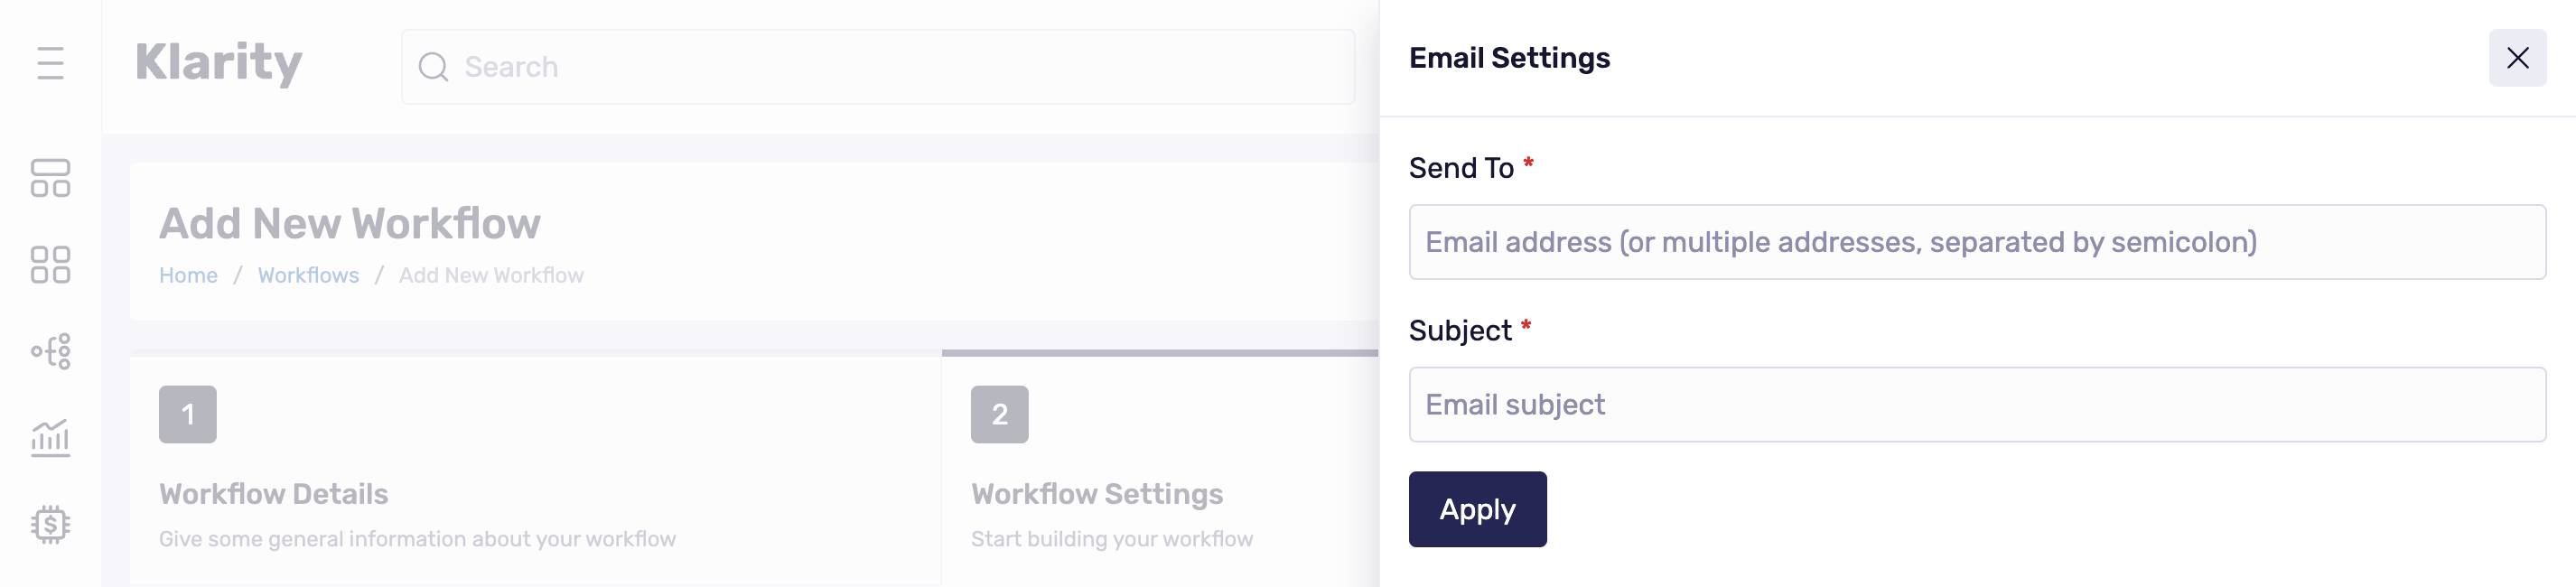 nu-email-settings